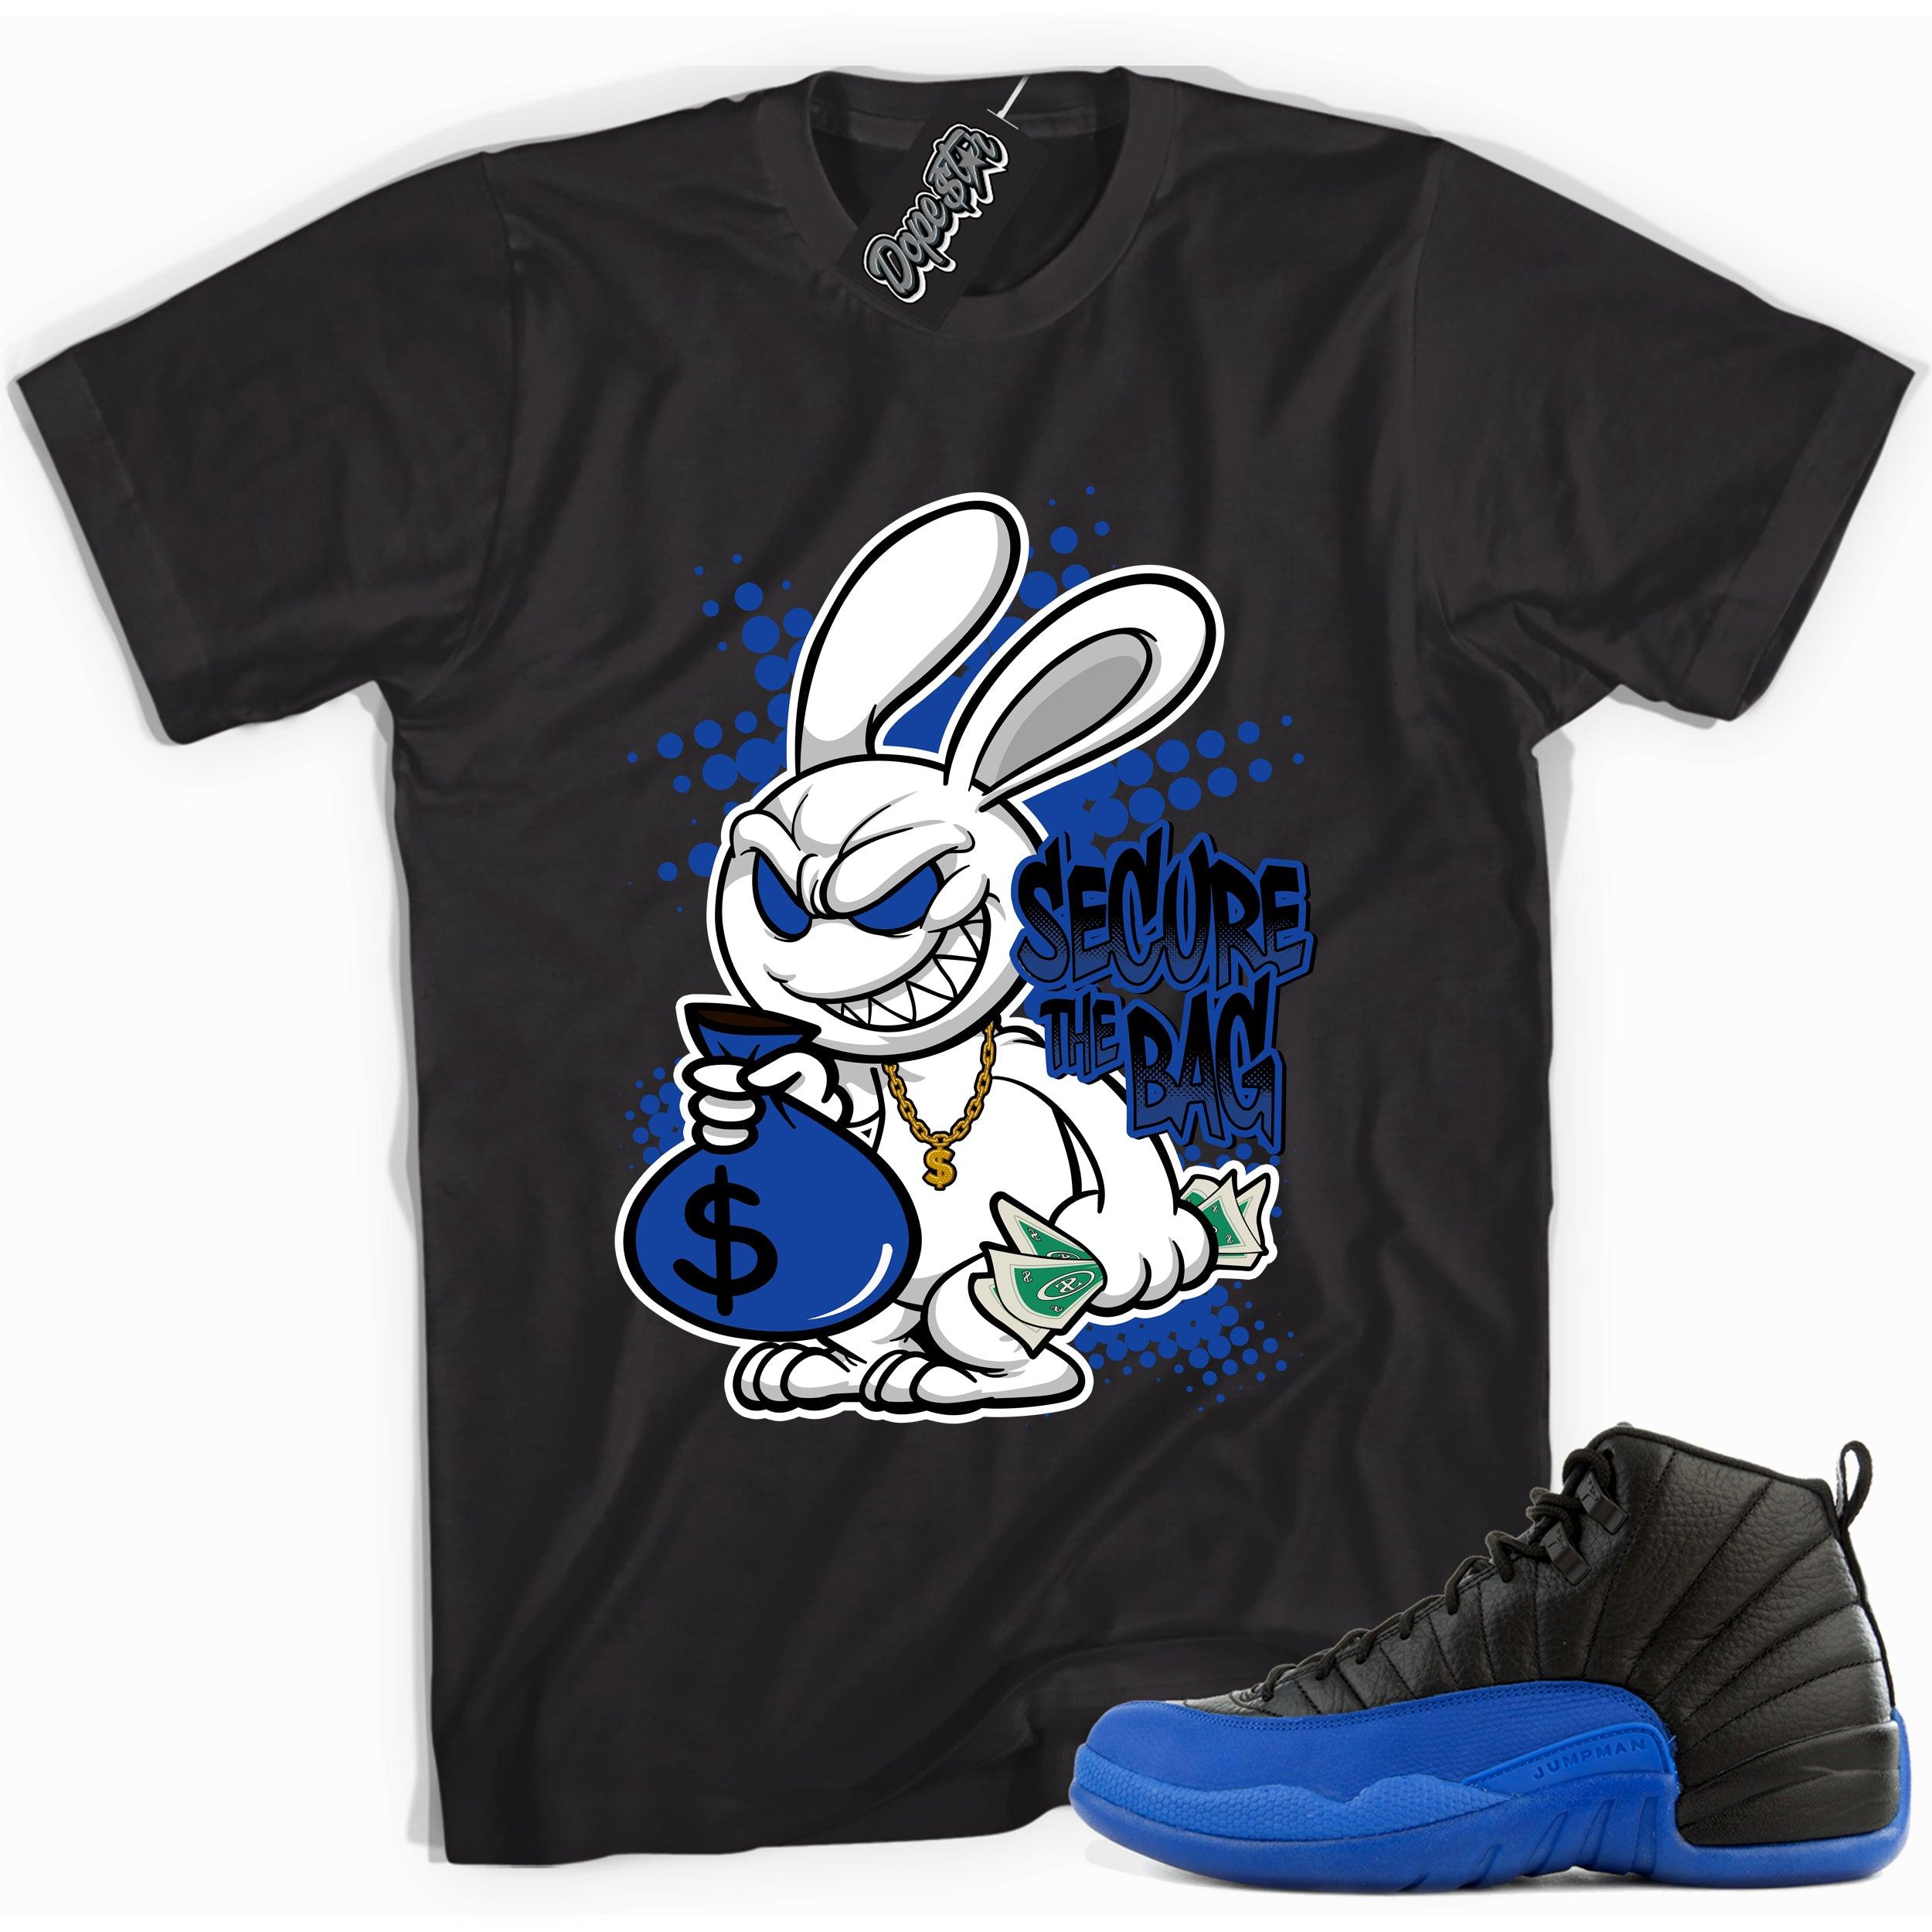 Cool black graphic tee with 'secure the bag' print, that perfectly matches  Air Jordan 12 Retro Black Game Royal sneakers.